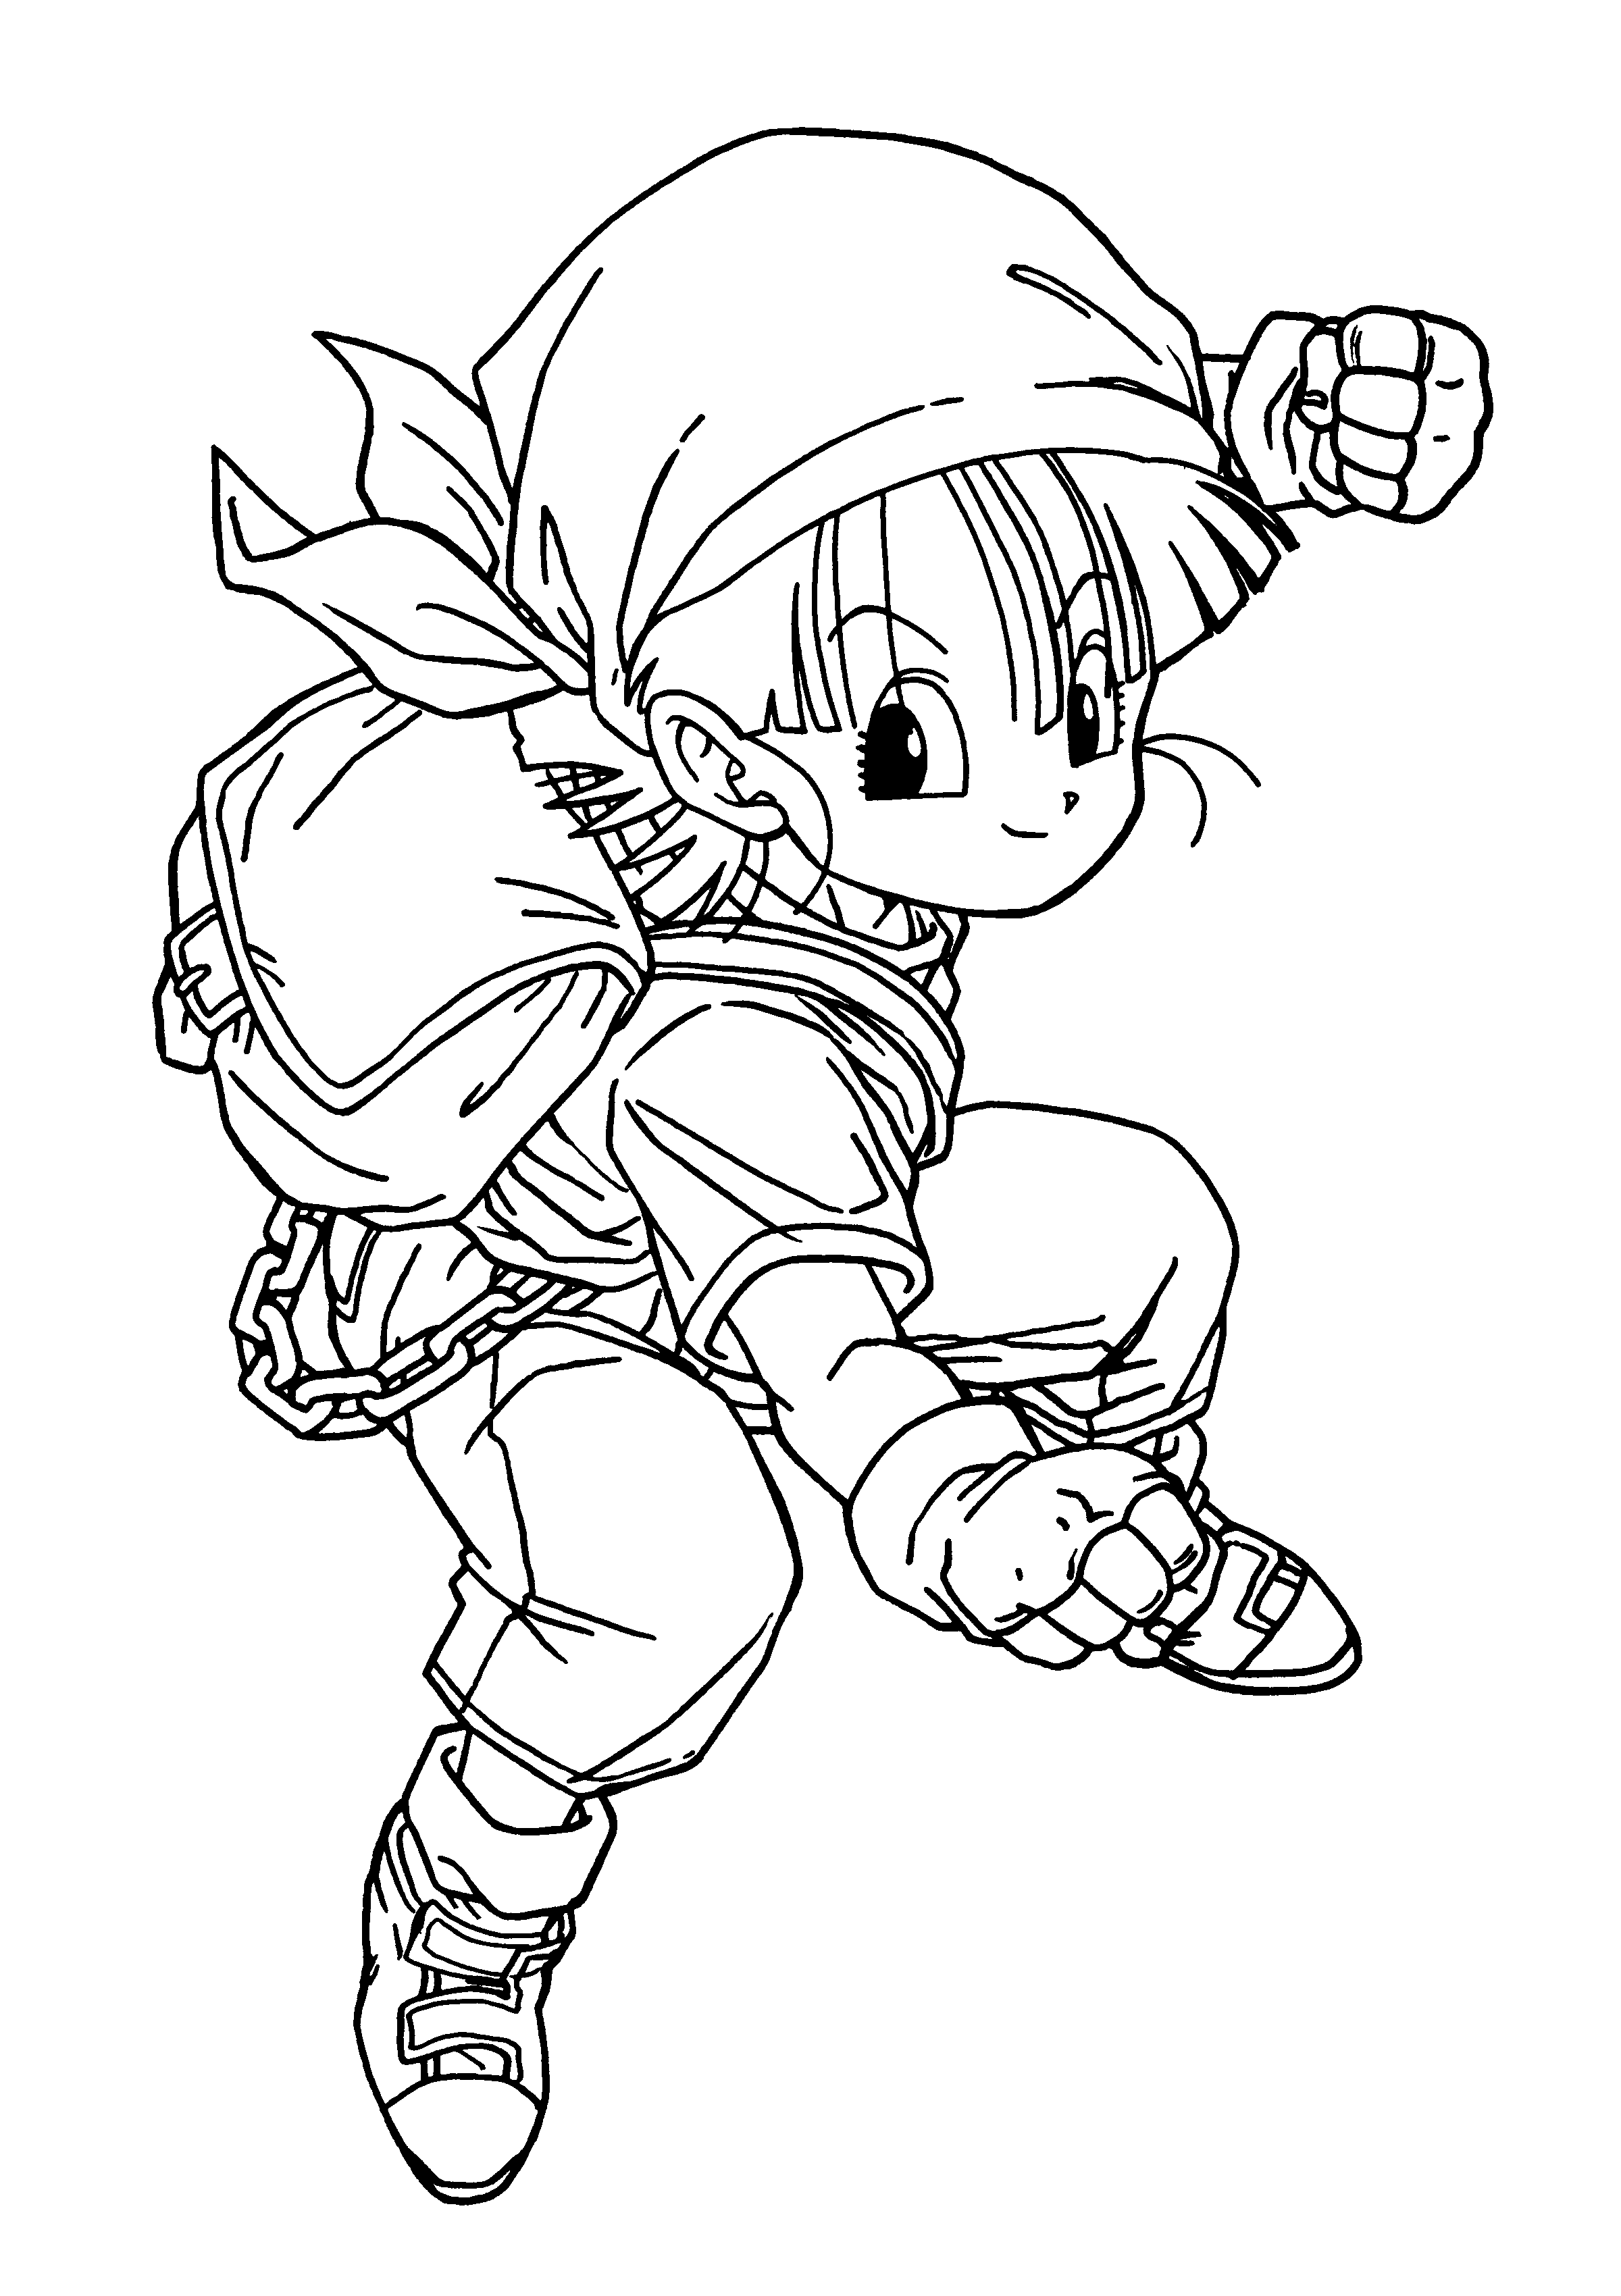 Dragon Ball Z Gt Colouring Pages | High Quality Coloring Pages